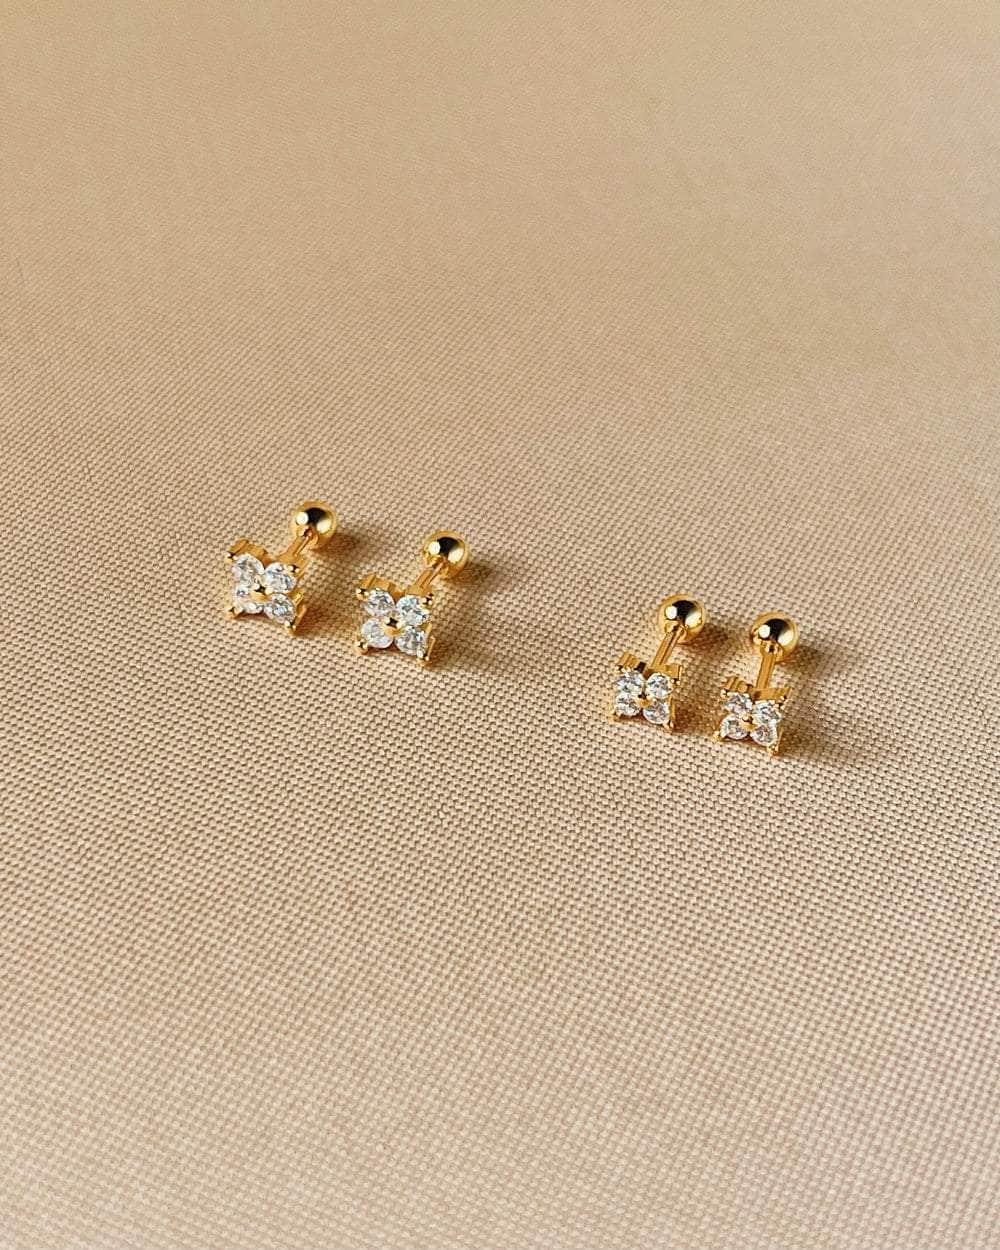 So Dainty Co. Studs Astrid Gold Studs (Choose 1 — 3mm / 4mm) Gold Plated 925 Sterling Silver Jewelry